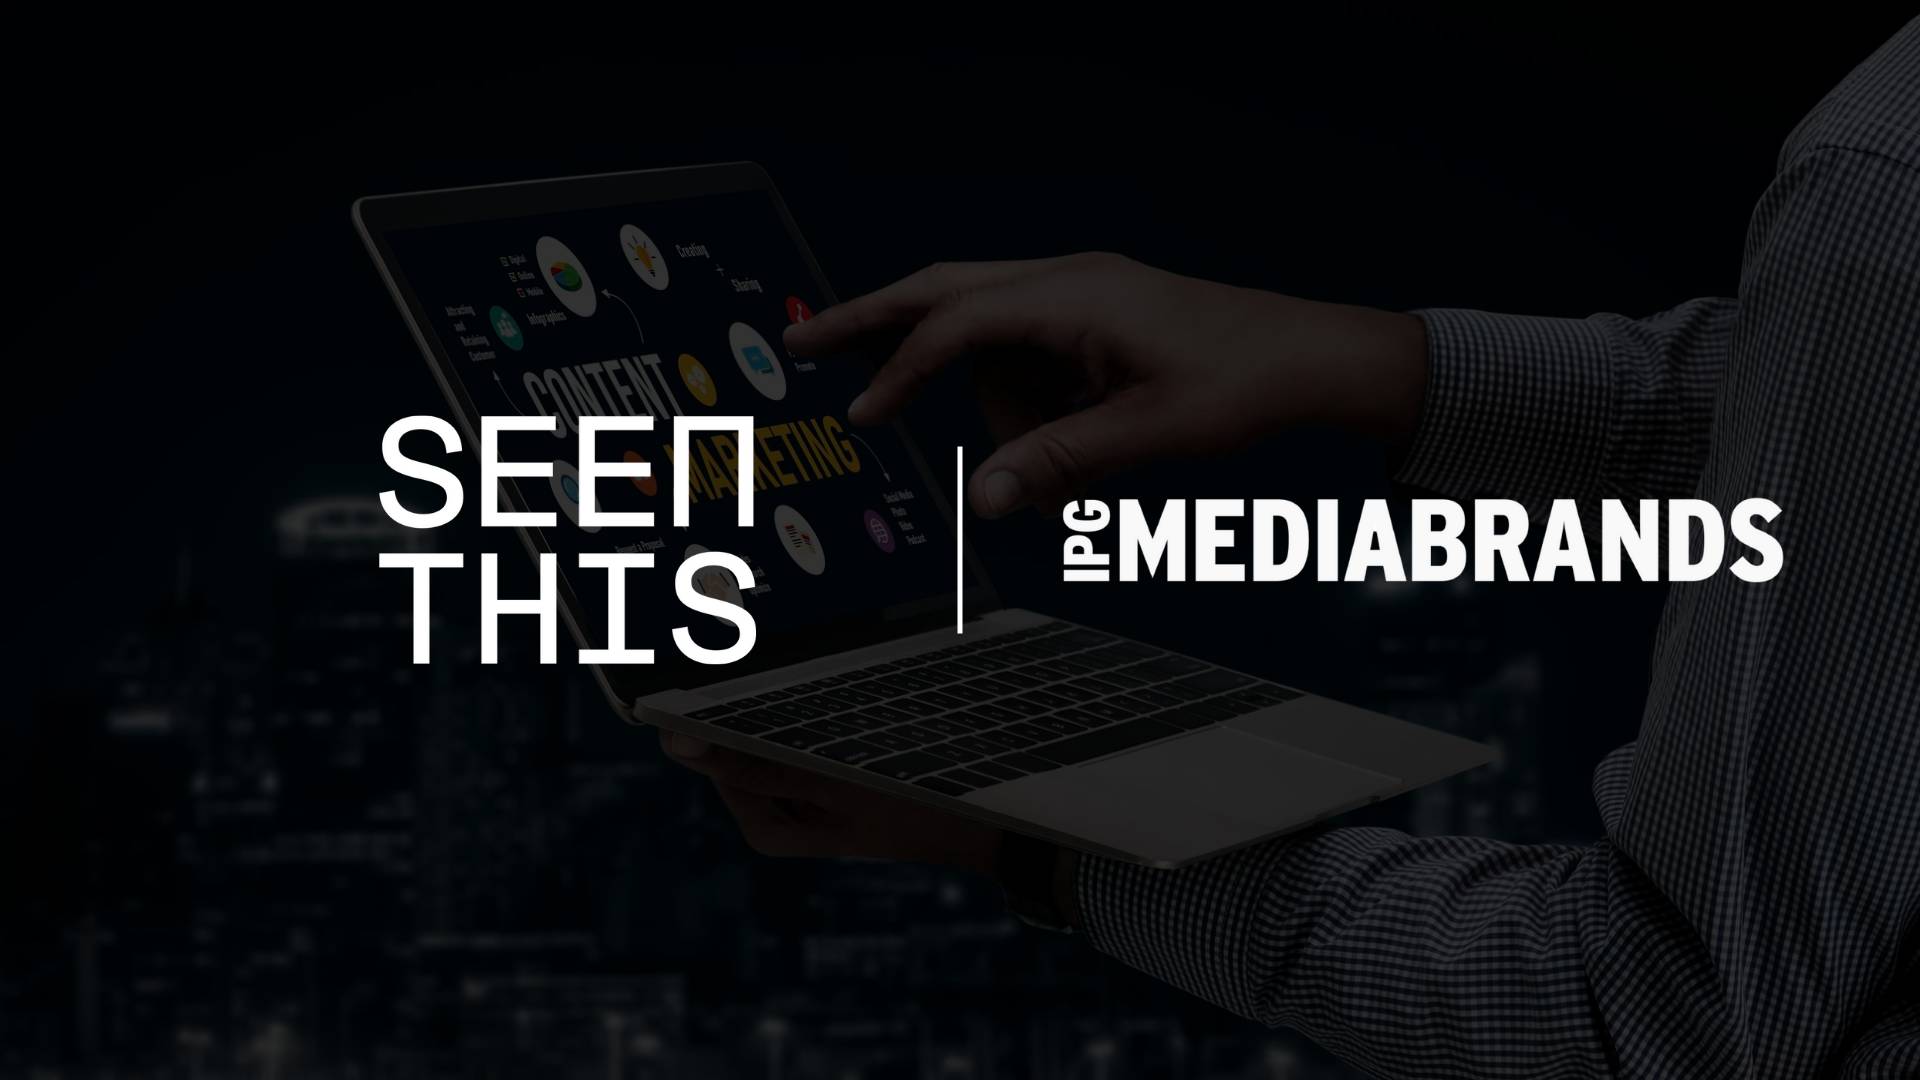 IPG Mediabrands and SeenThis Launch Industry’s First Green Advertising Marketplace with Climate Action Marketplace (CAM)